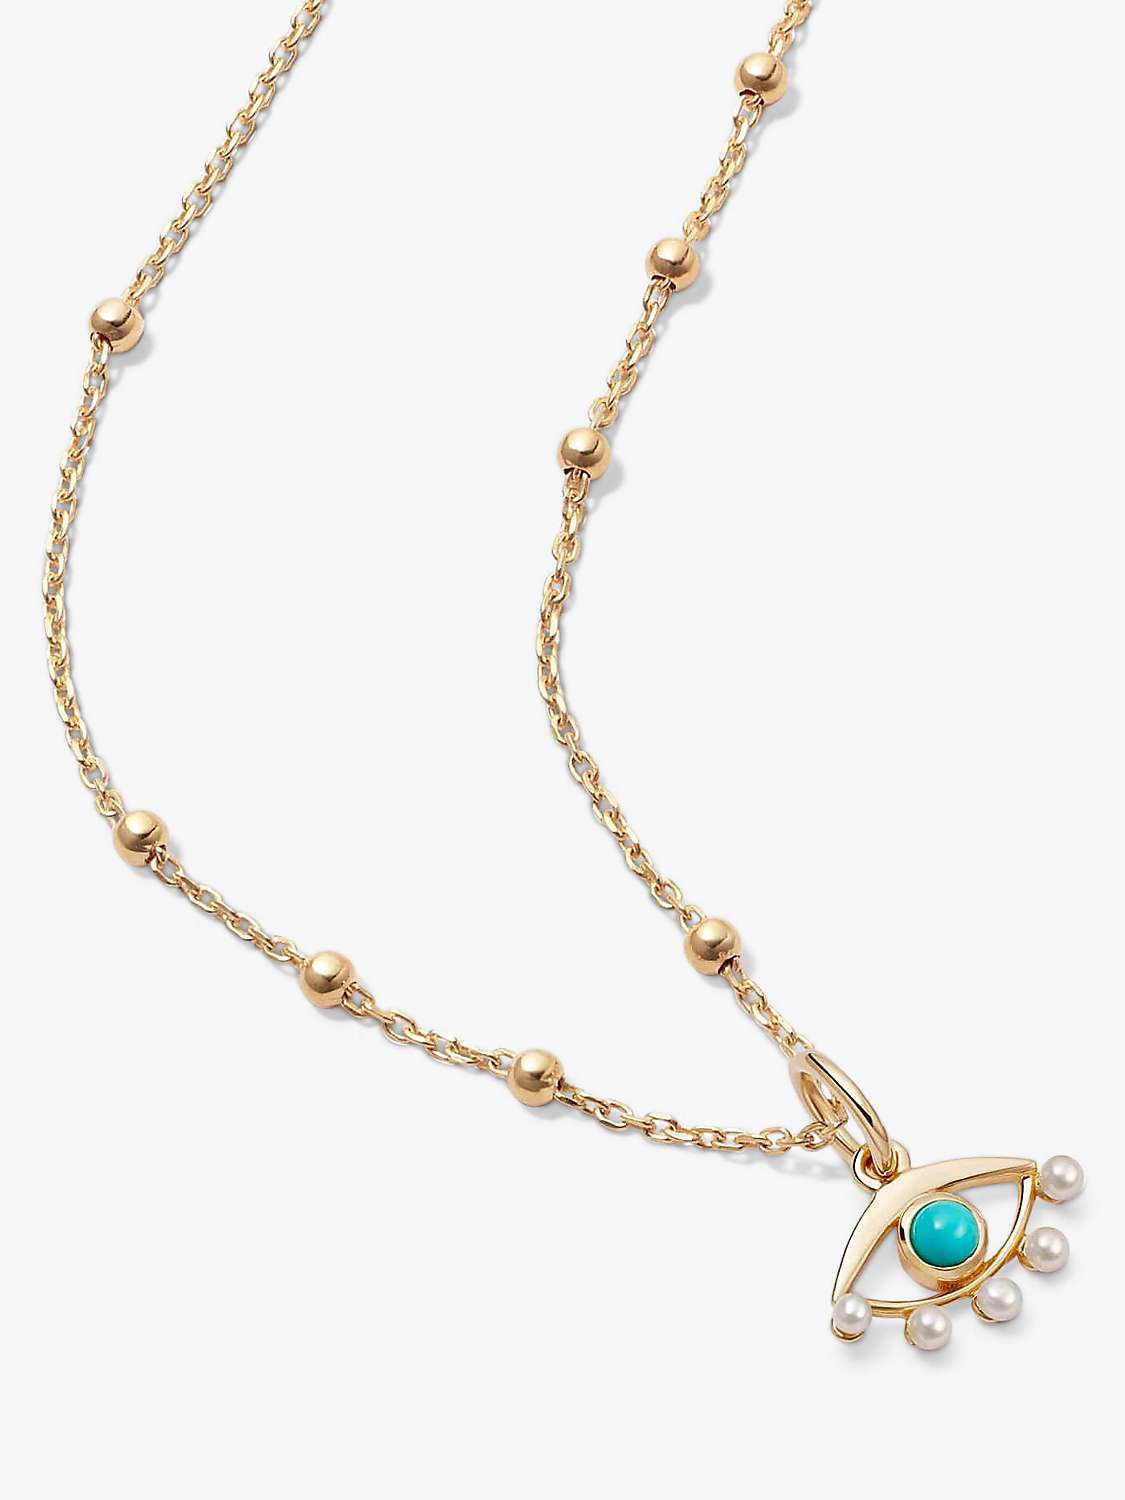 Buy Daisy London Evil Eye Turquoise & Pearl Pendant Necklace, Gold Online at johnlewis.com